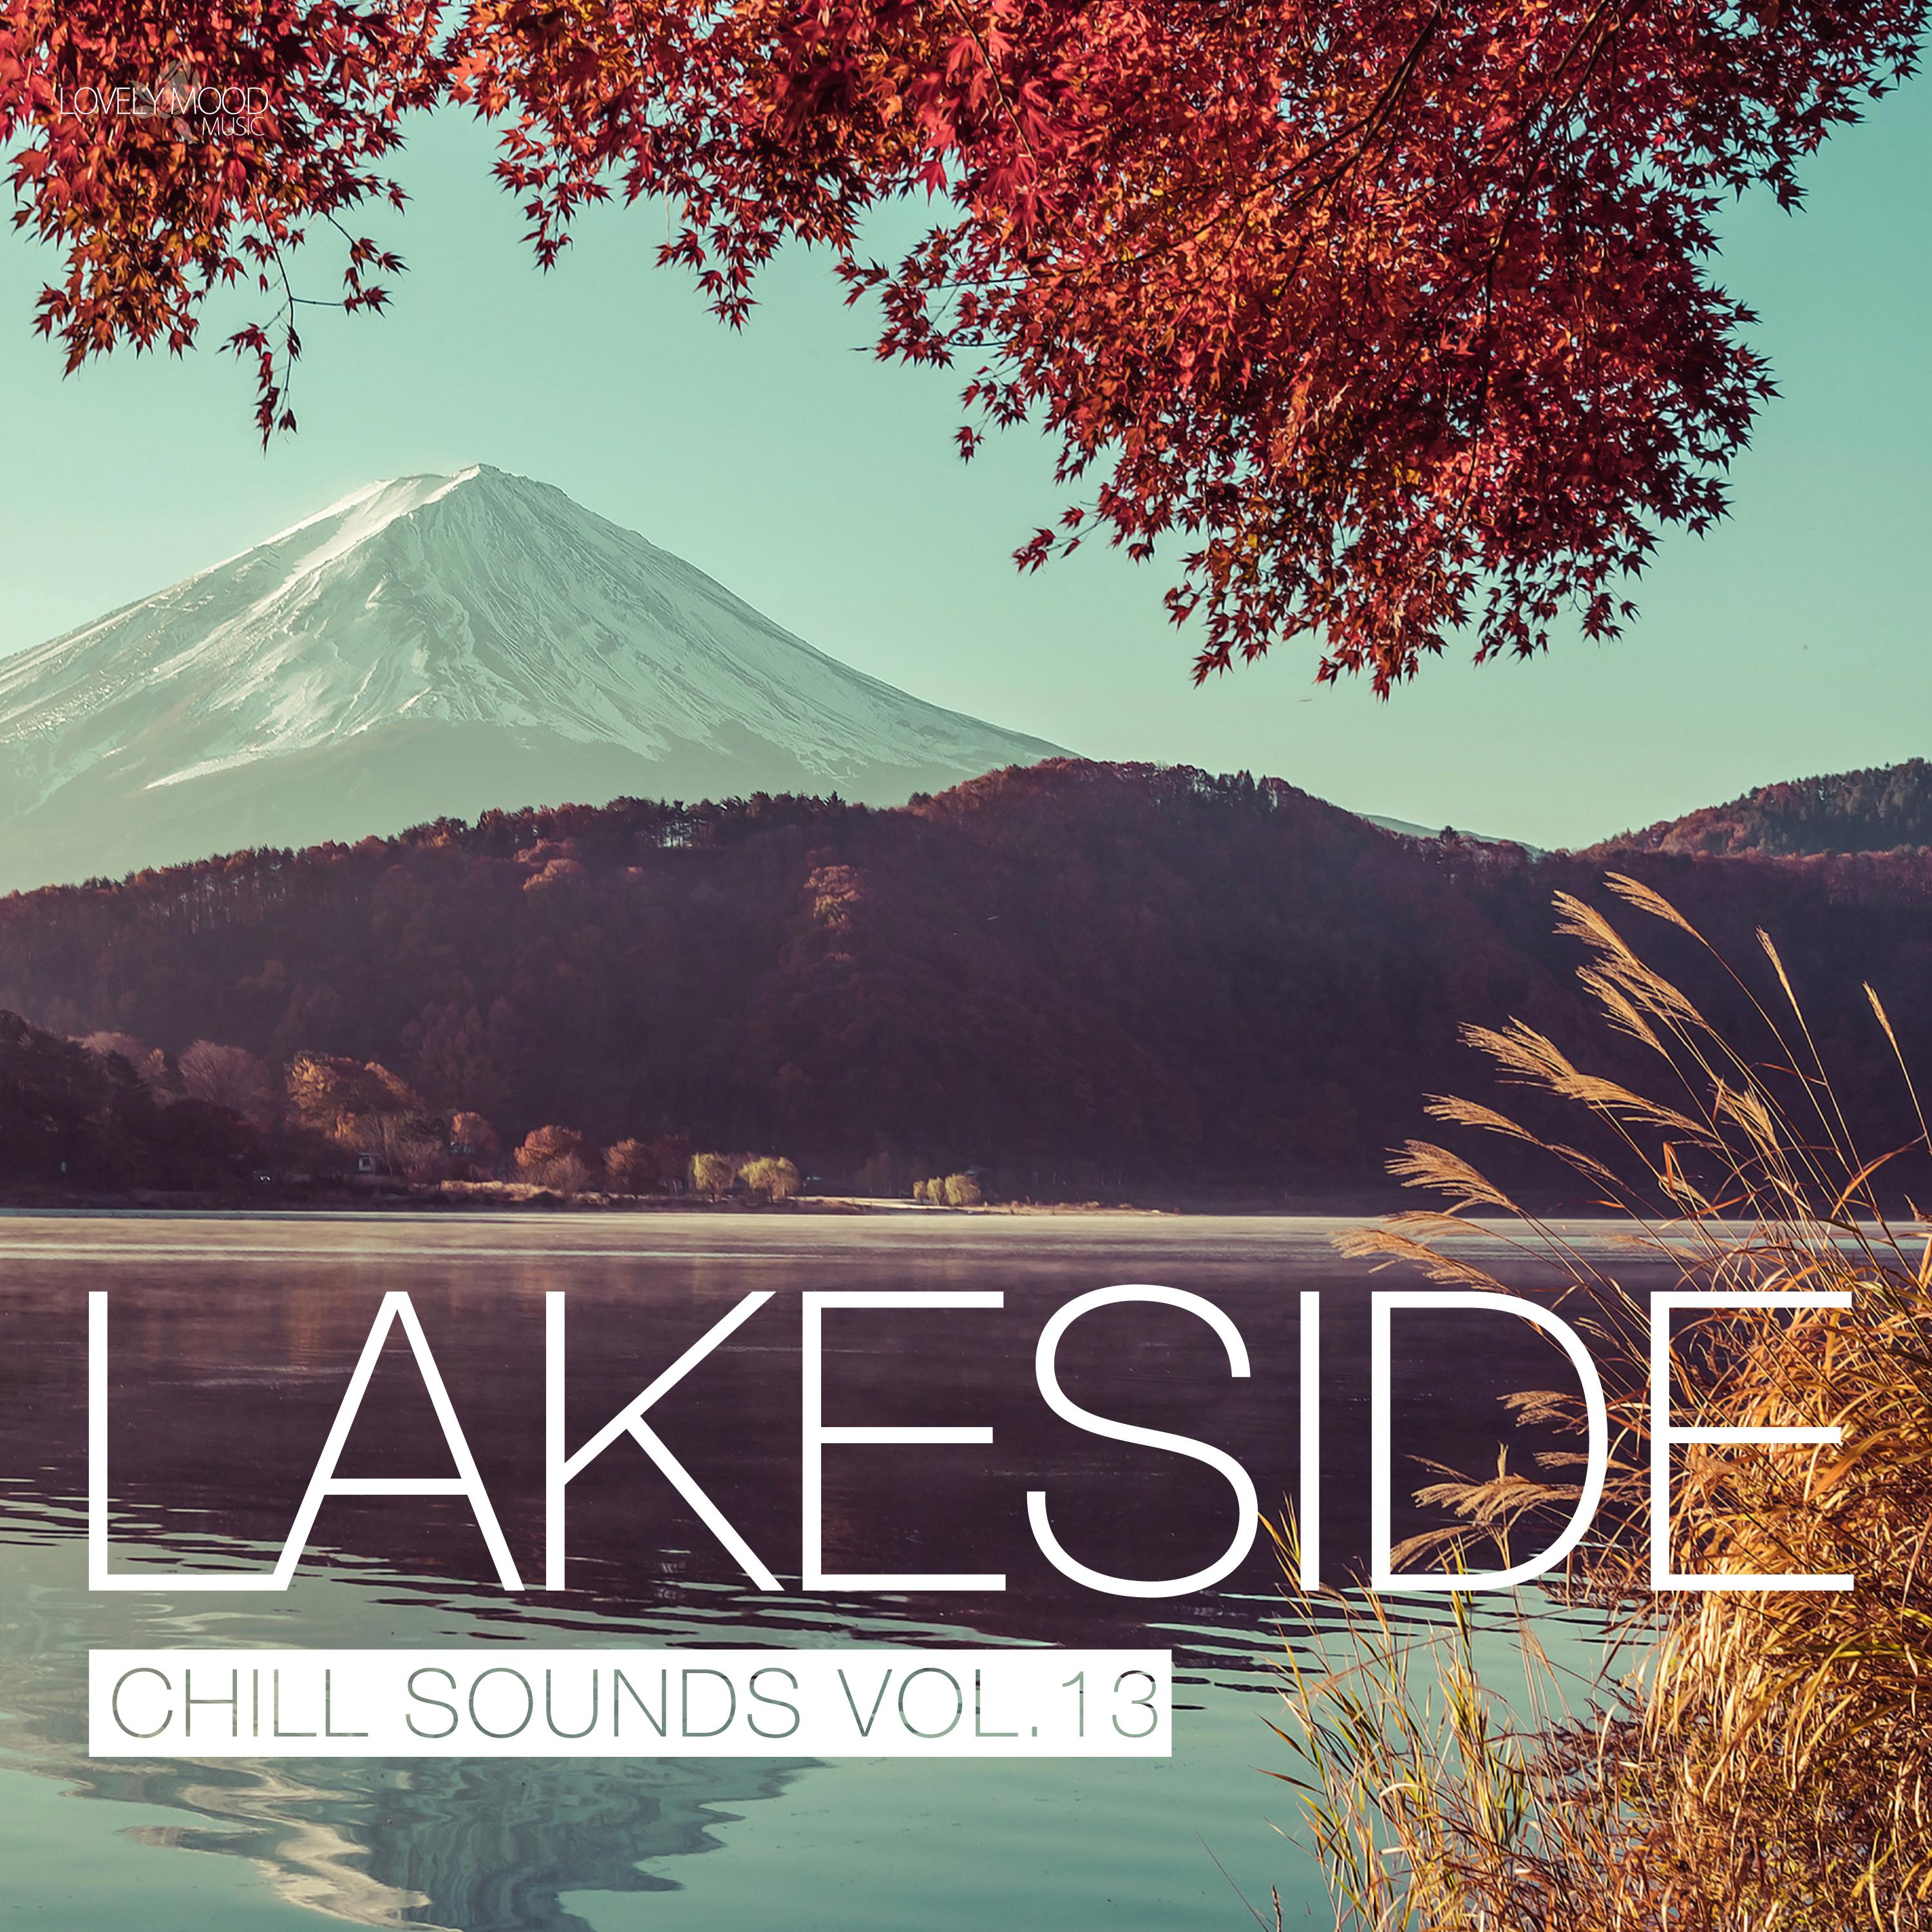 Lakeside Chill Sounds, Vol. 13